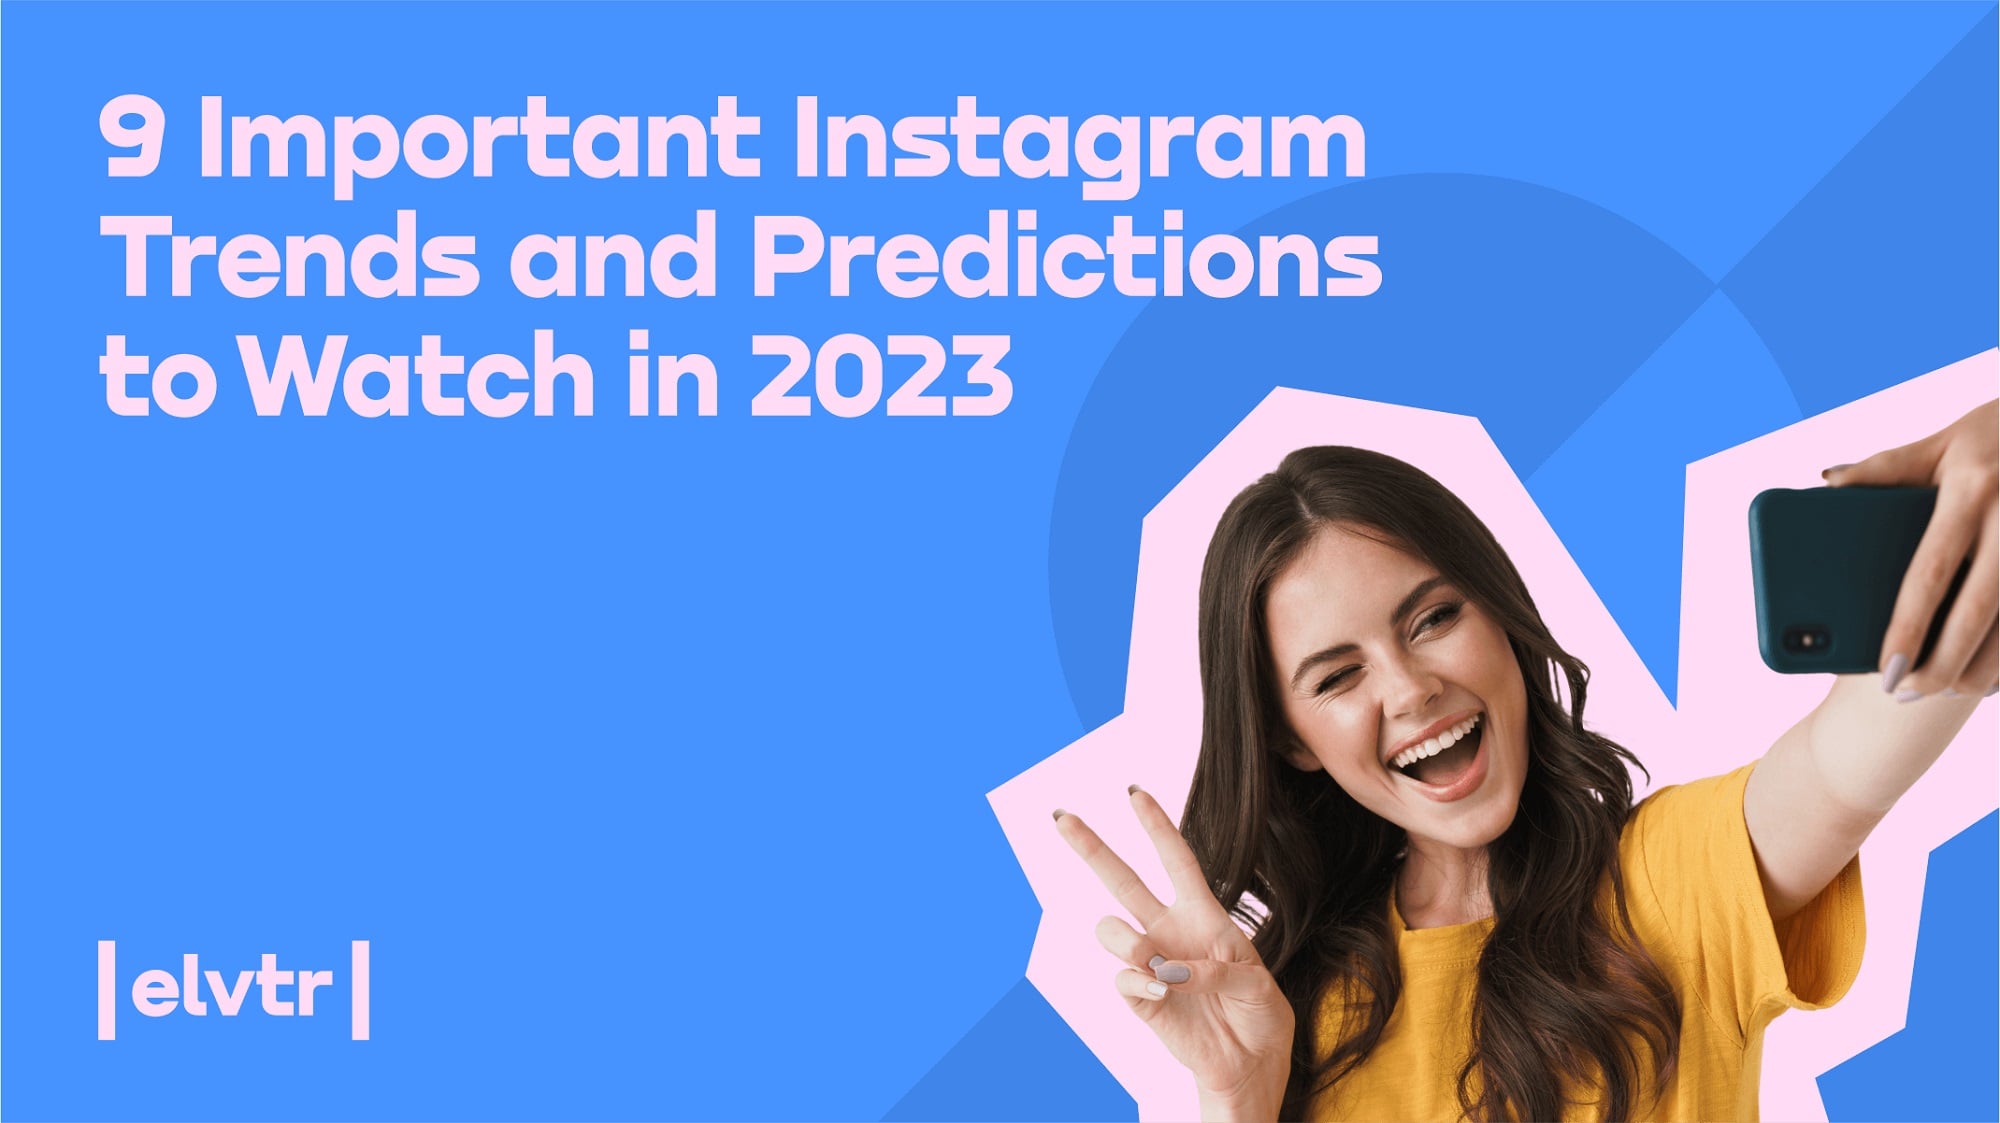 9 Important Instagram Trends and Predictions to Watch in 2023 image